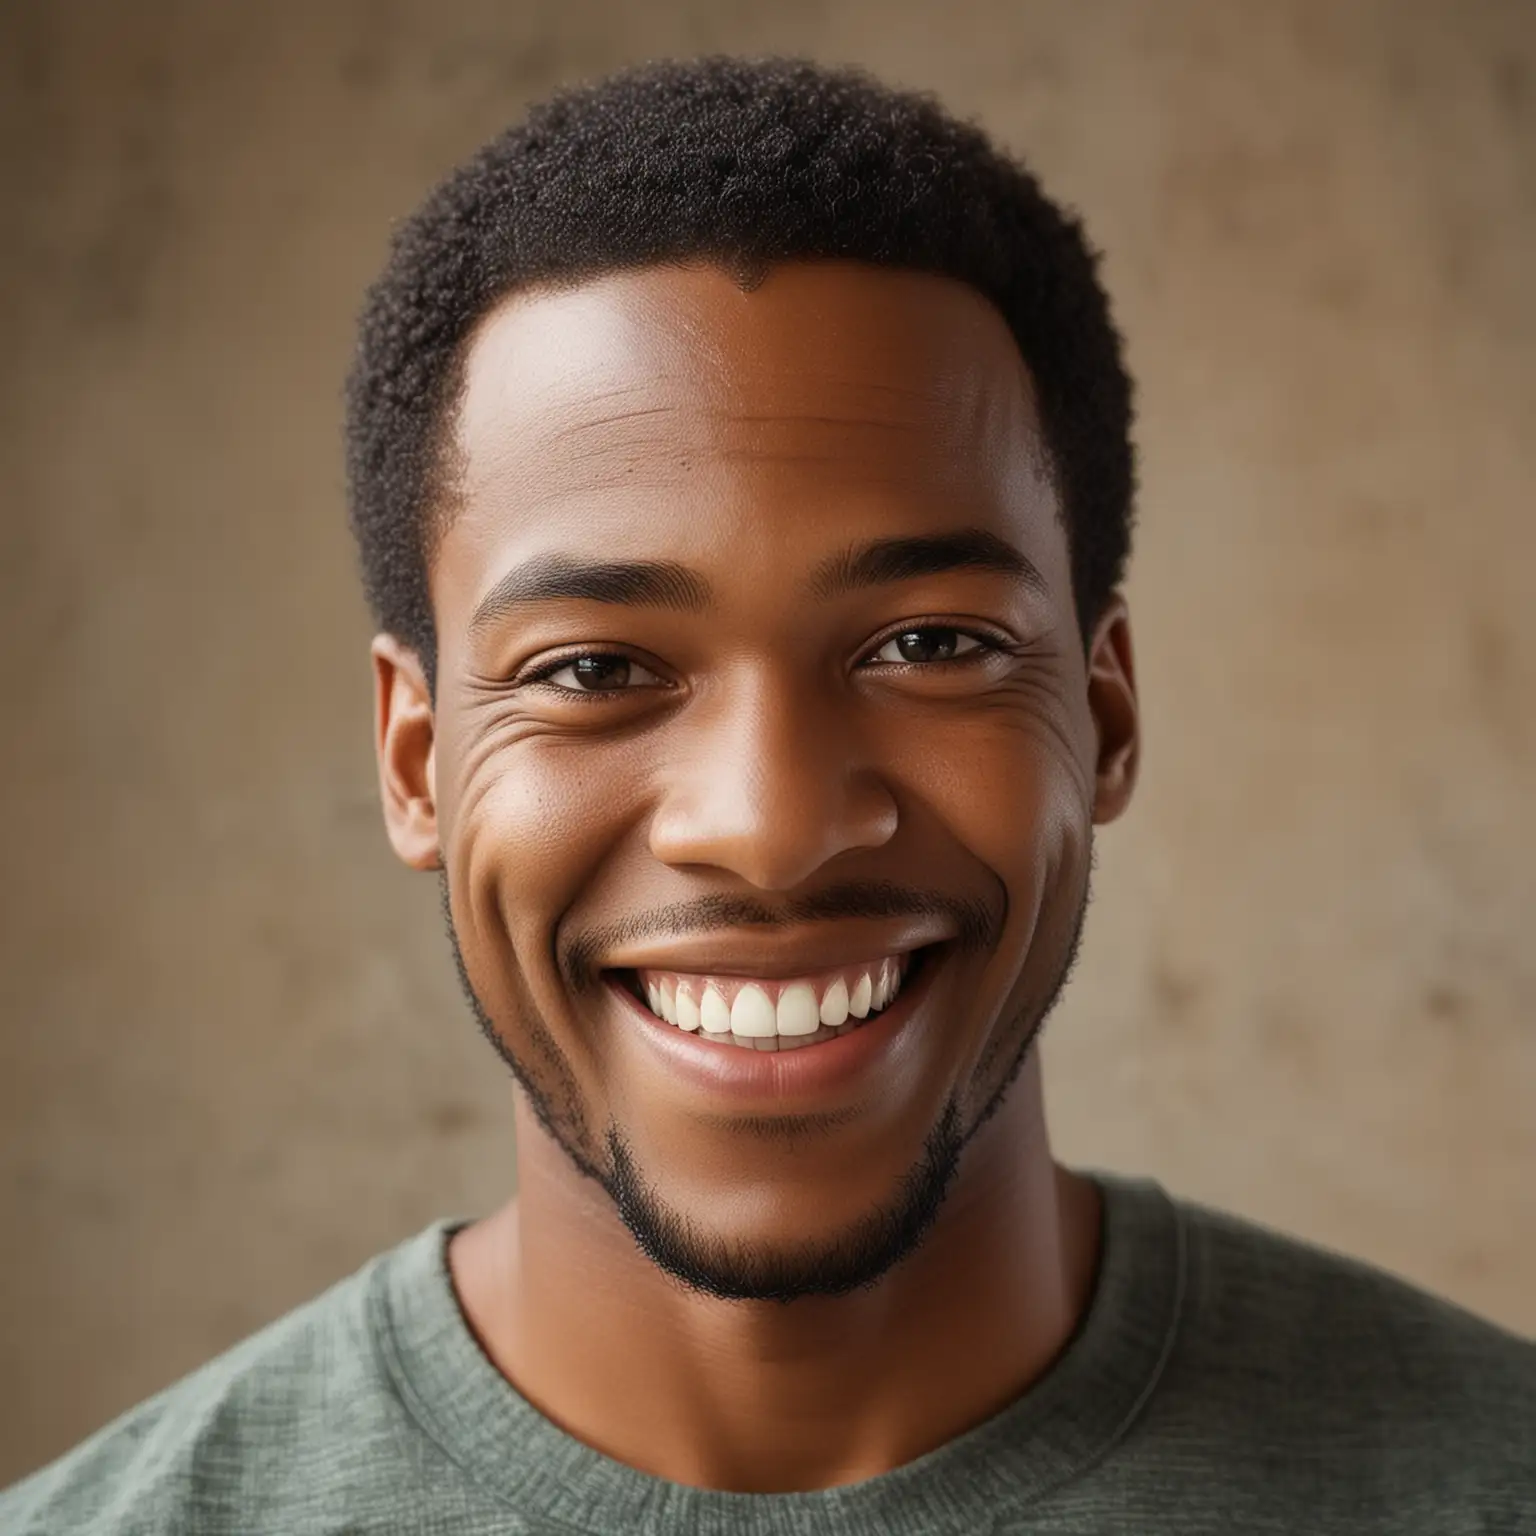 Cheerful AfricanAmerican Man Smiling